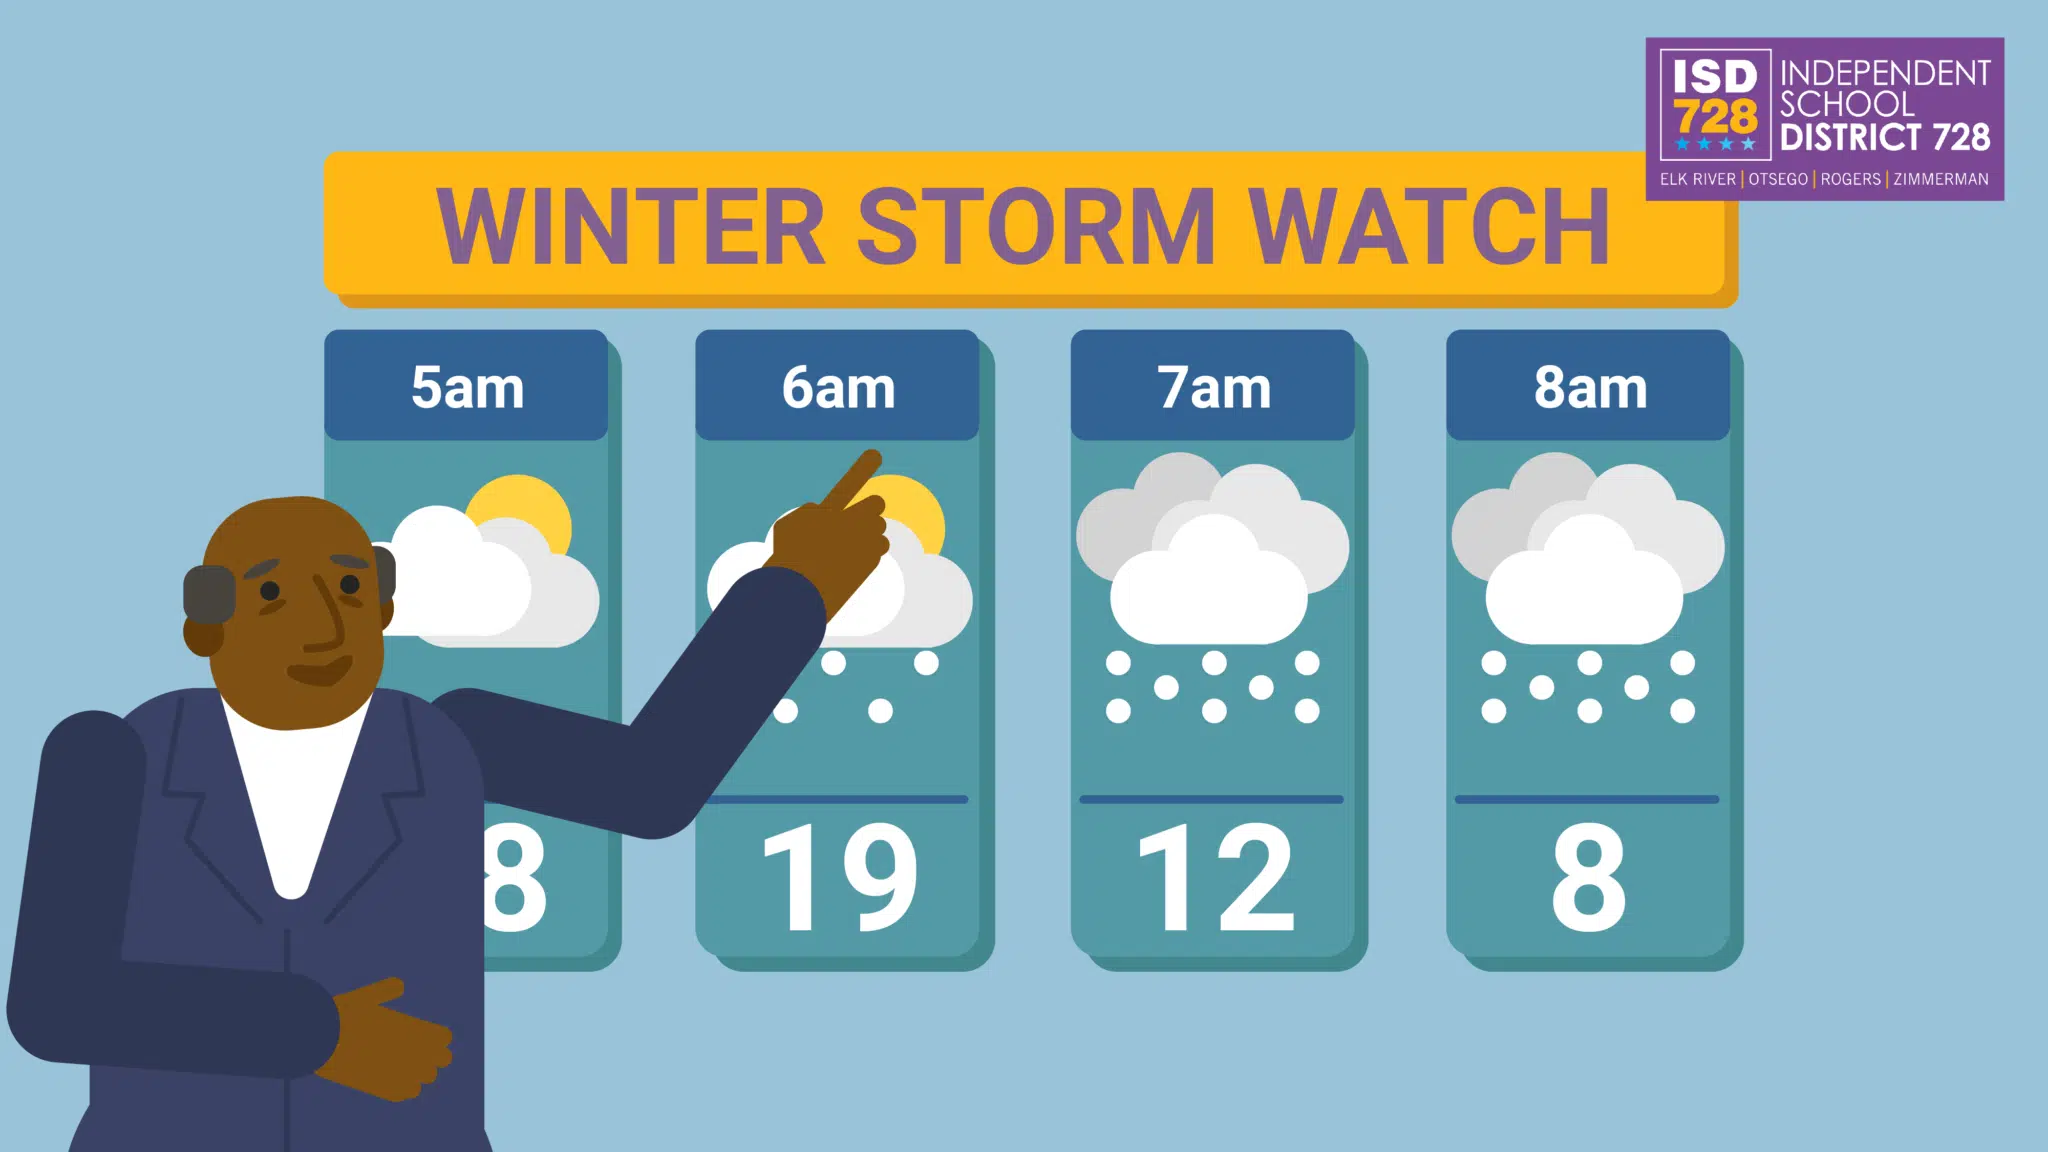 Animated image of a meteorologist in front of a weather forecast titled "Winter Storm Watch"